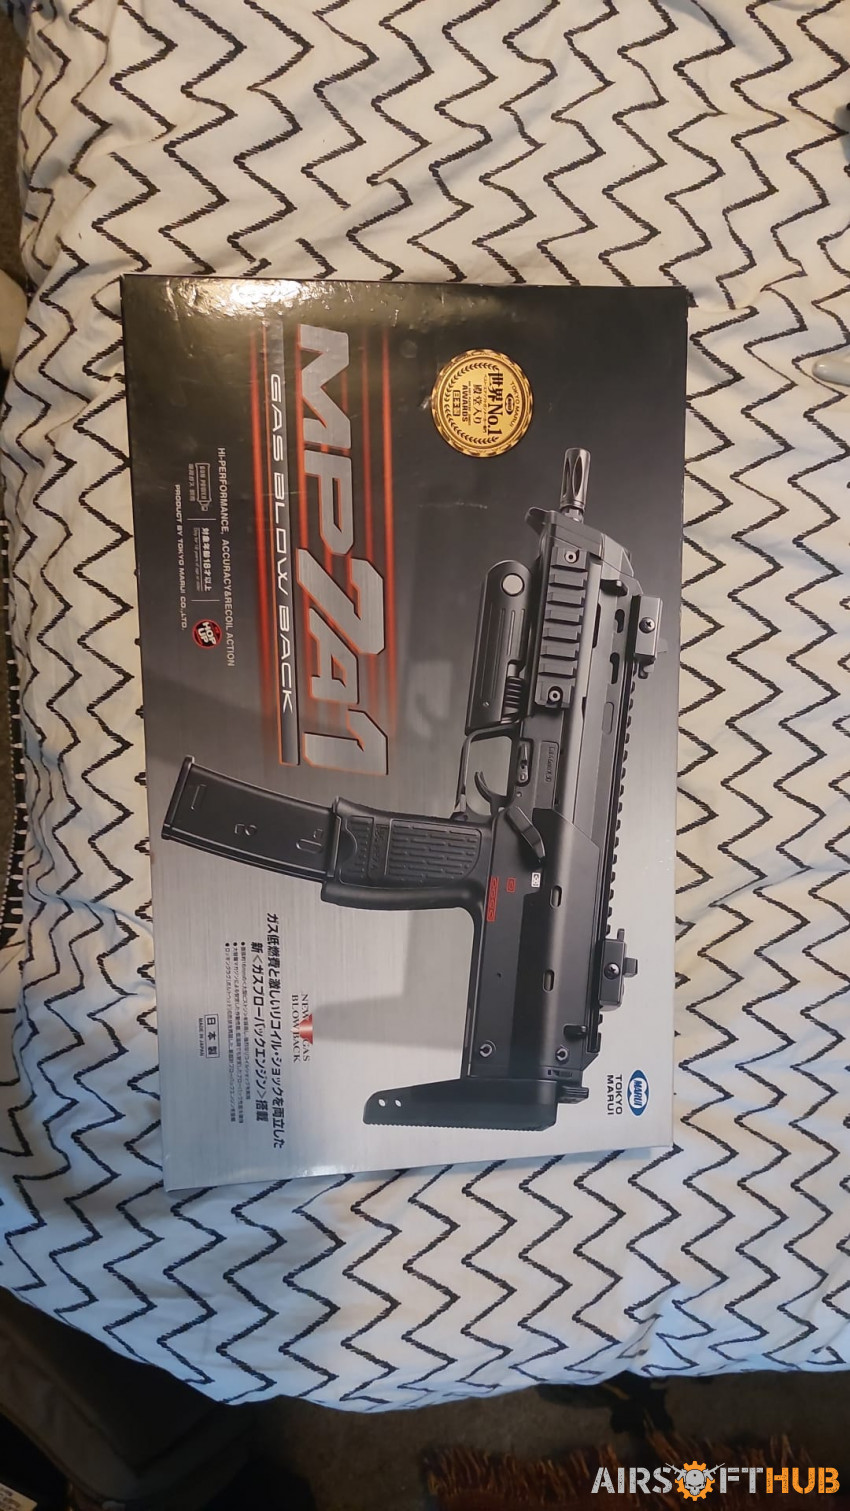 Mp7 gas magazine wanted - Used airsoft equipment